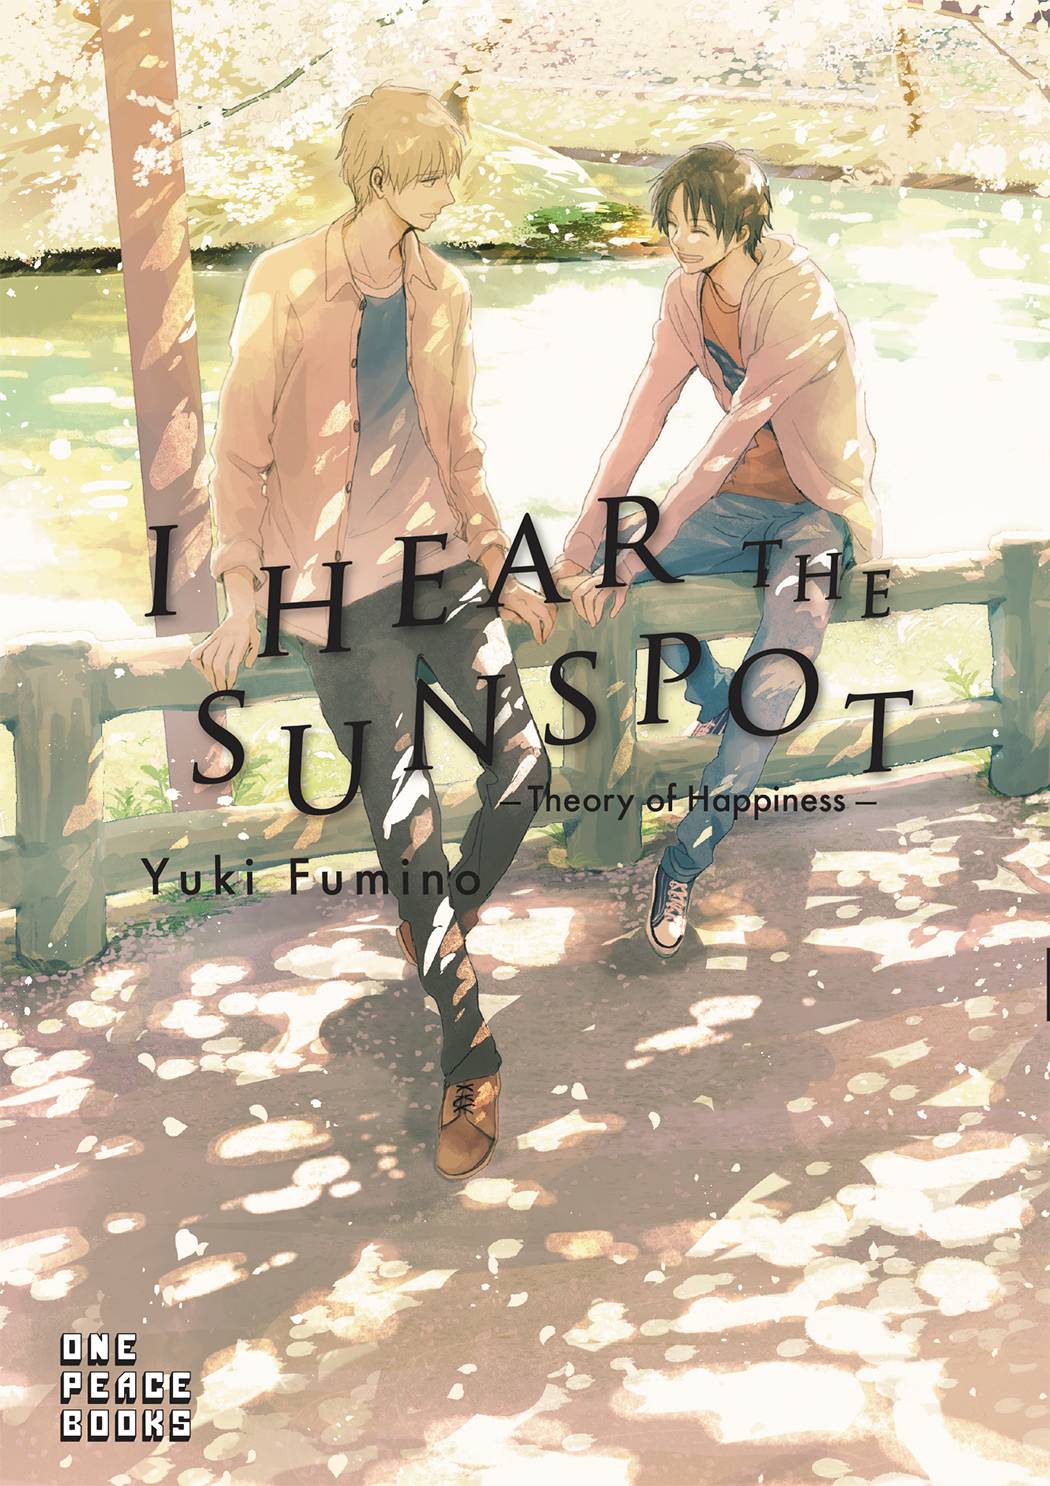 I HEAR THE SUNSPOT GN VOL 02 THEORY HAPPINESS